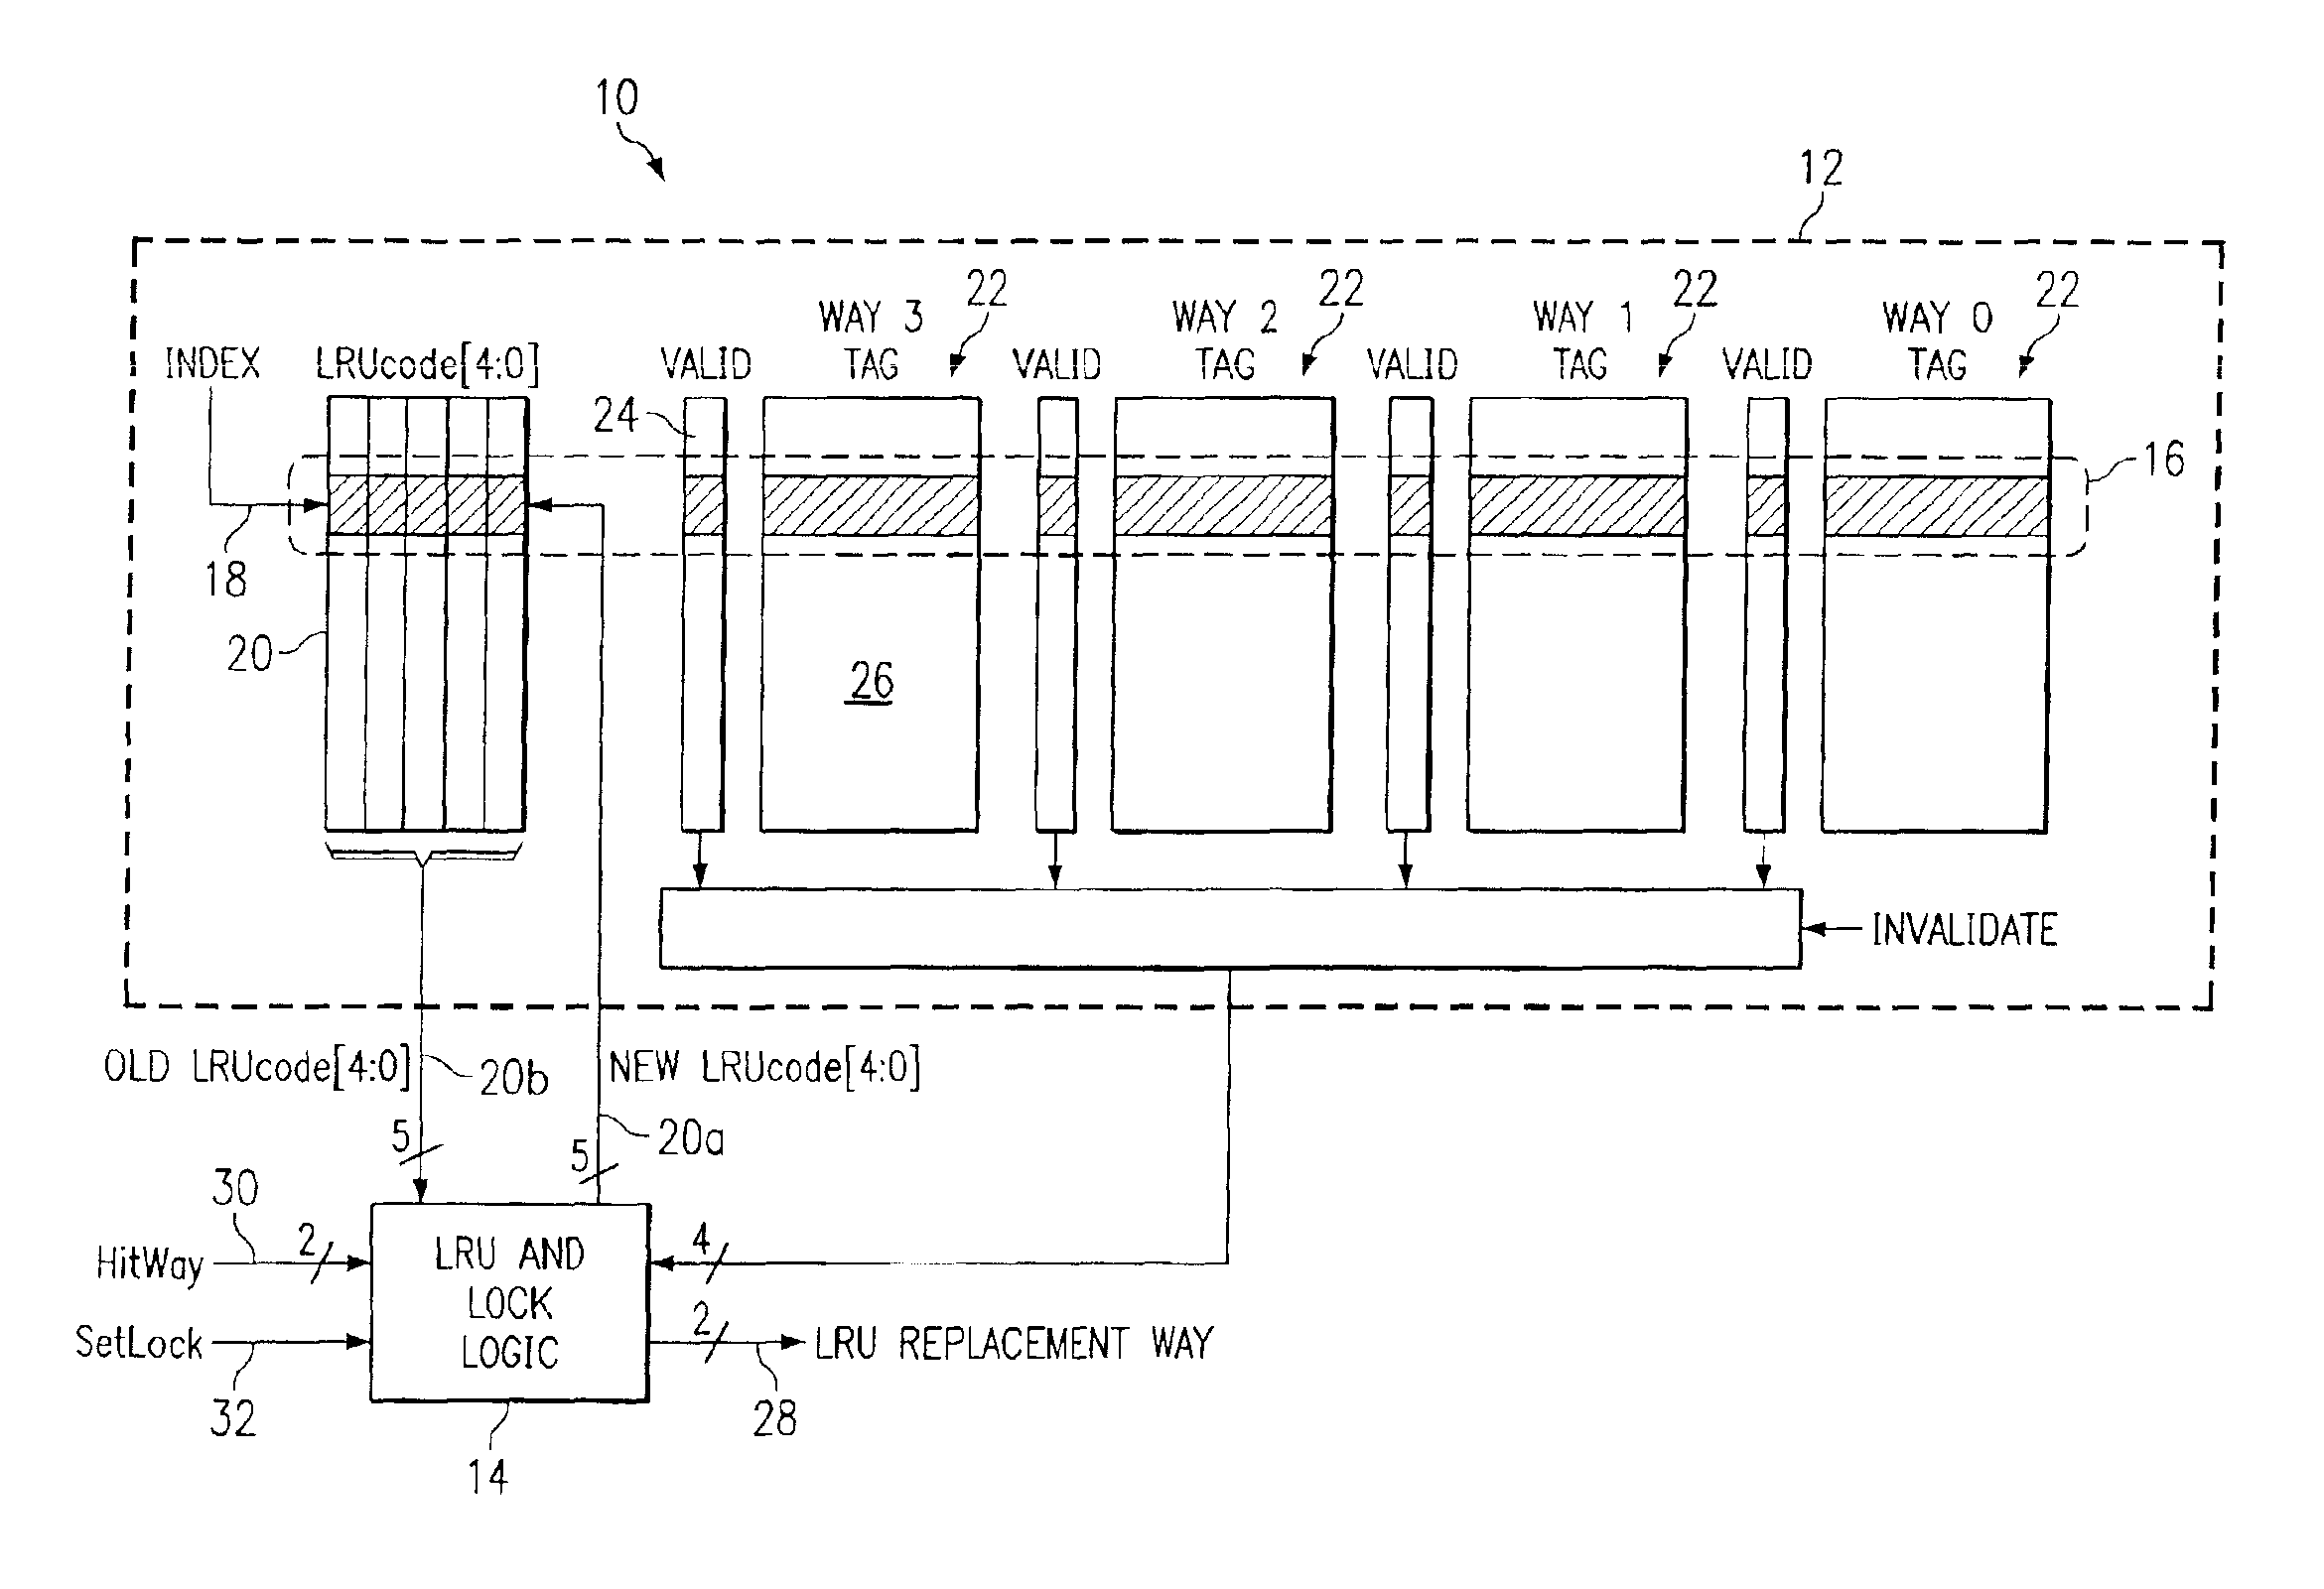 Cache memory for identifying locked and least recently used storage locations